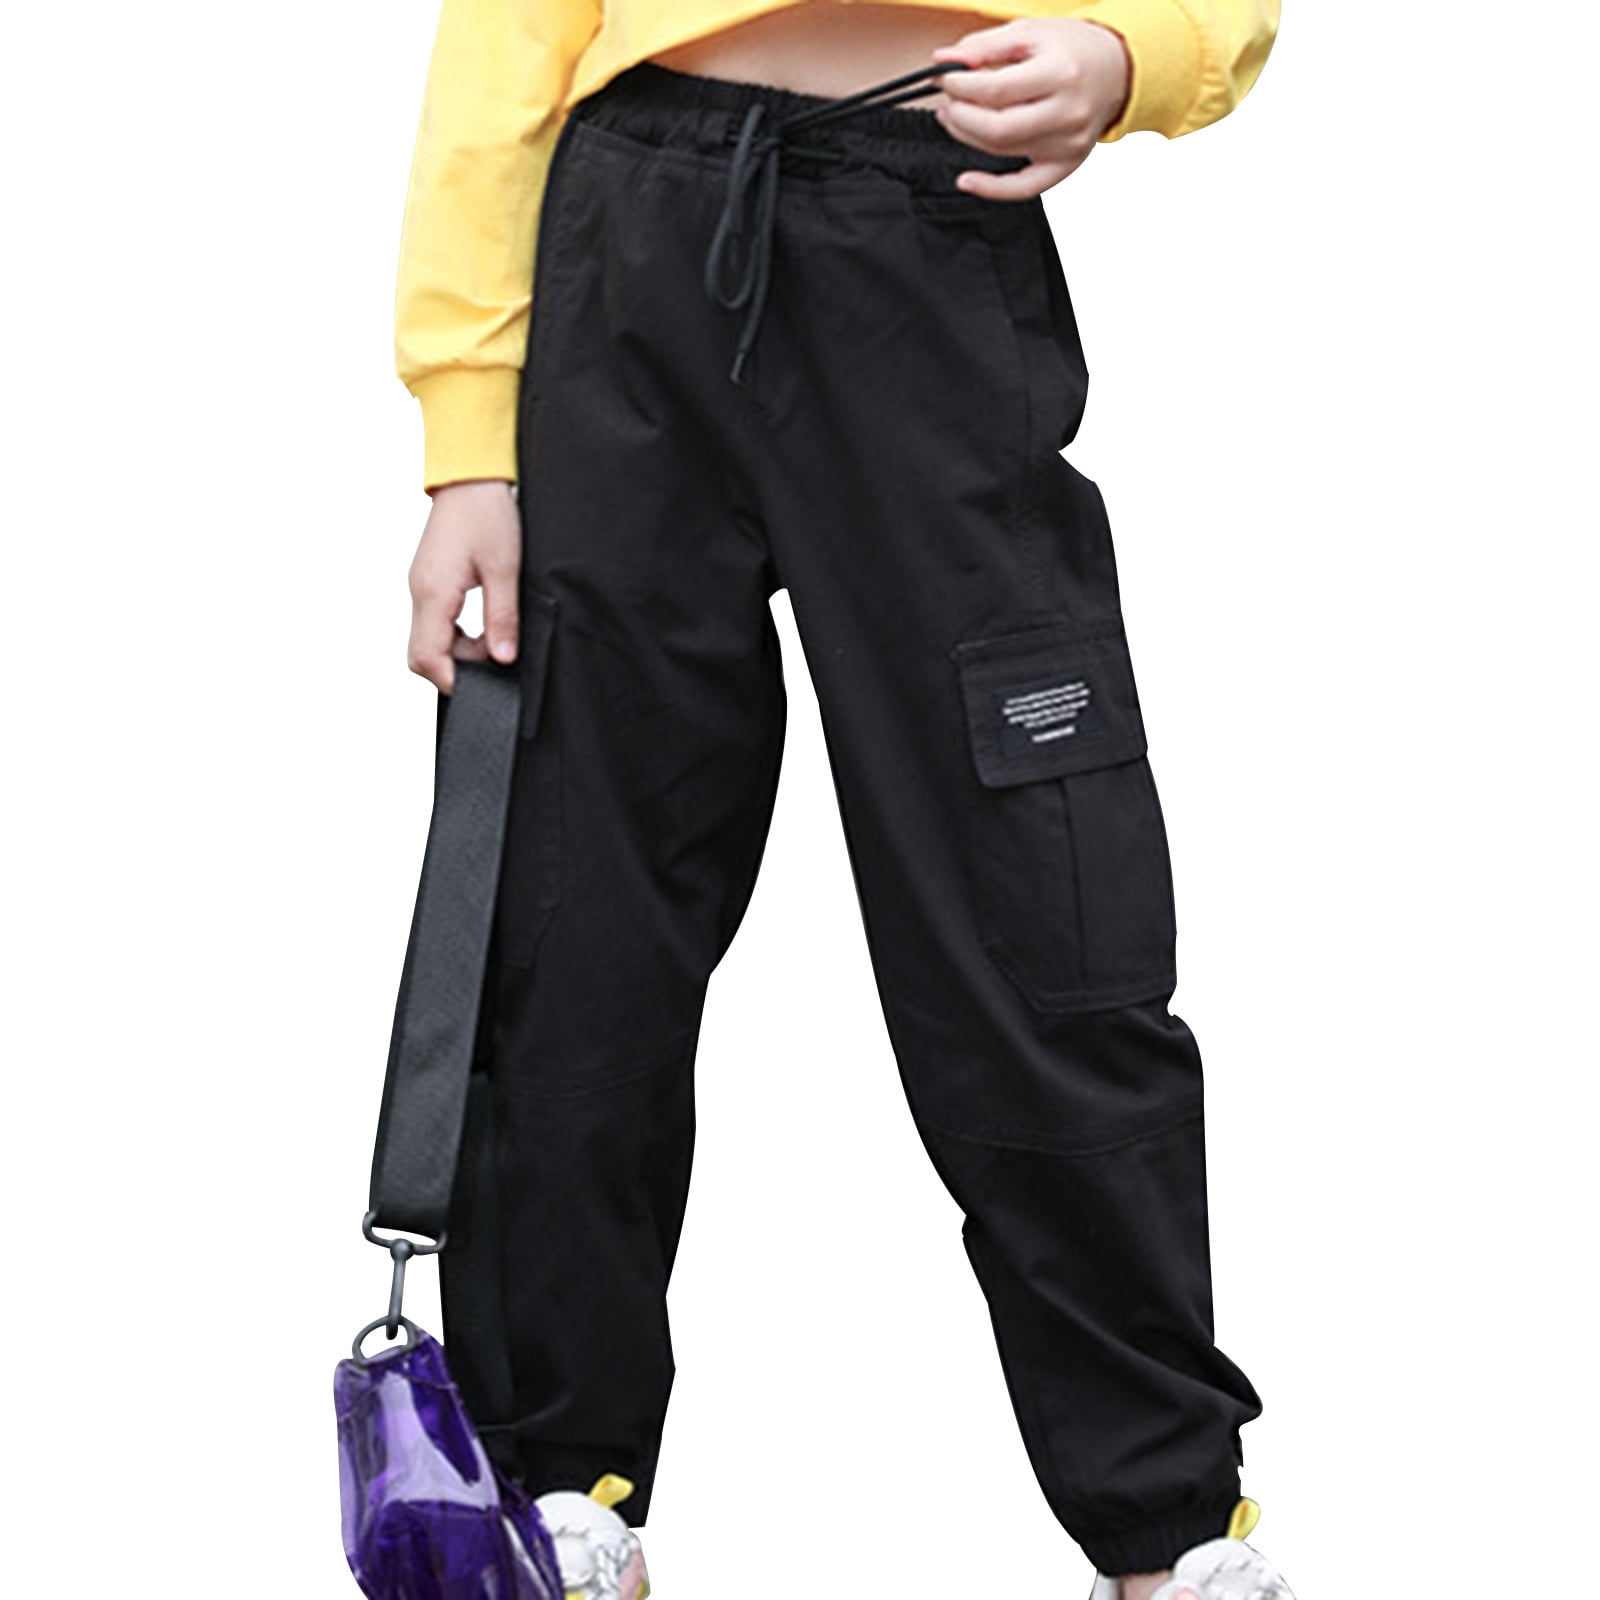 DPOIS Kids Girls Cargo Jogger Pants Sports Pockets Trousers